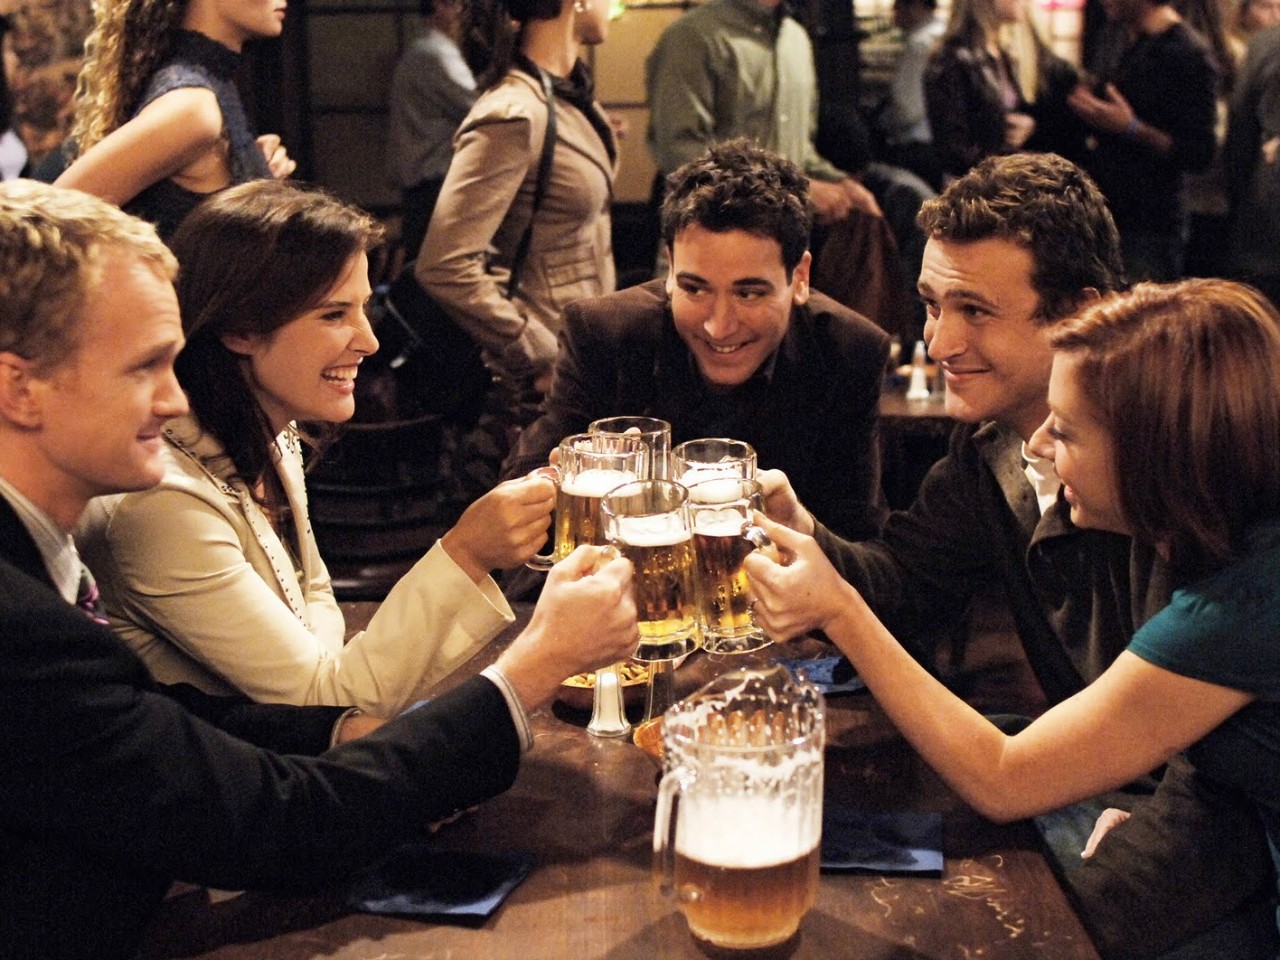 How I Met Your Mother Pics, TV Show Collection